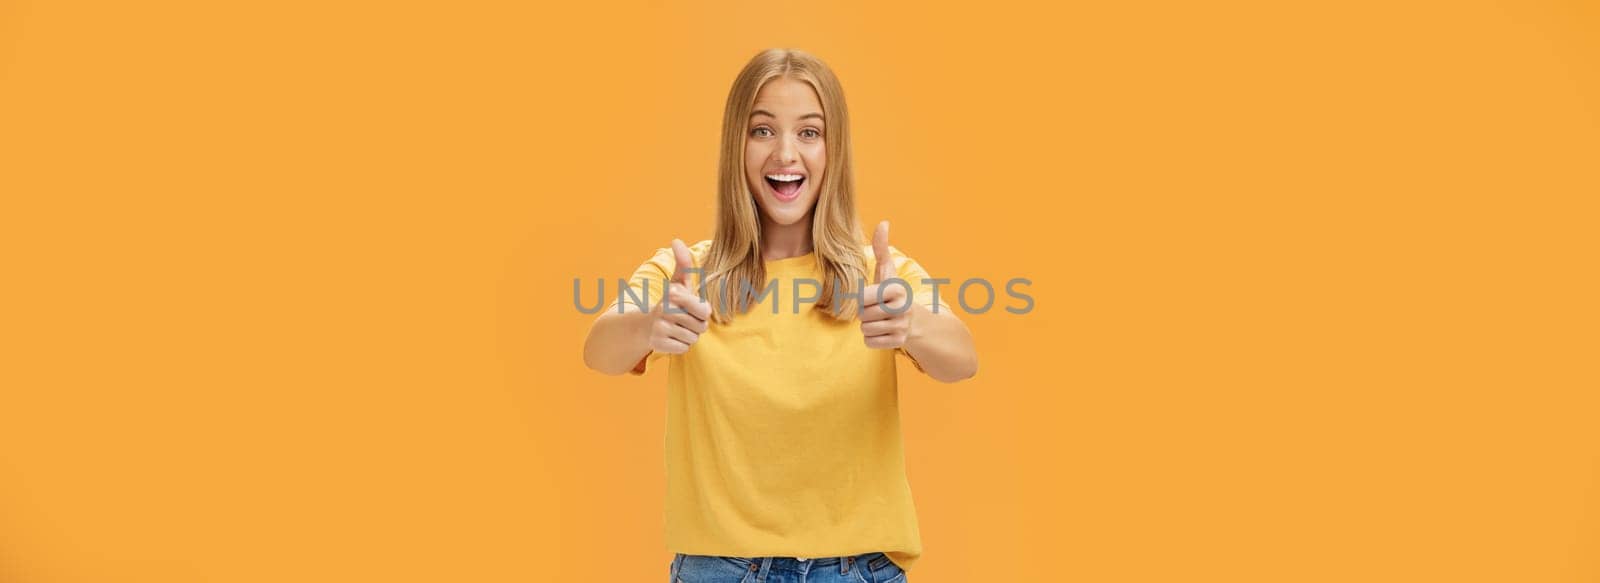 Woman supports with raised thumbs up and amused cheerful smile showing positive attitude expressing like on concept or idea giving approval posing happy and delighted against orange background by Benzoix